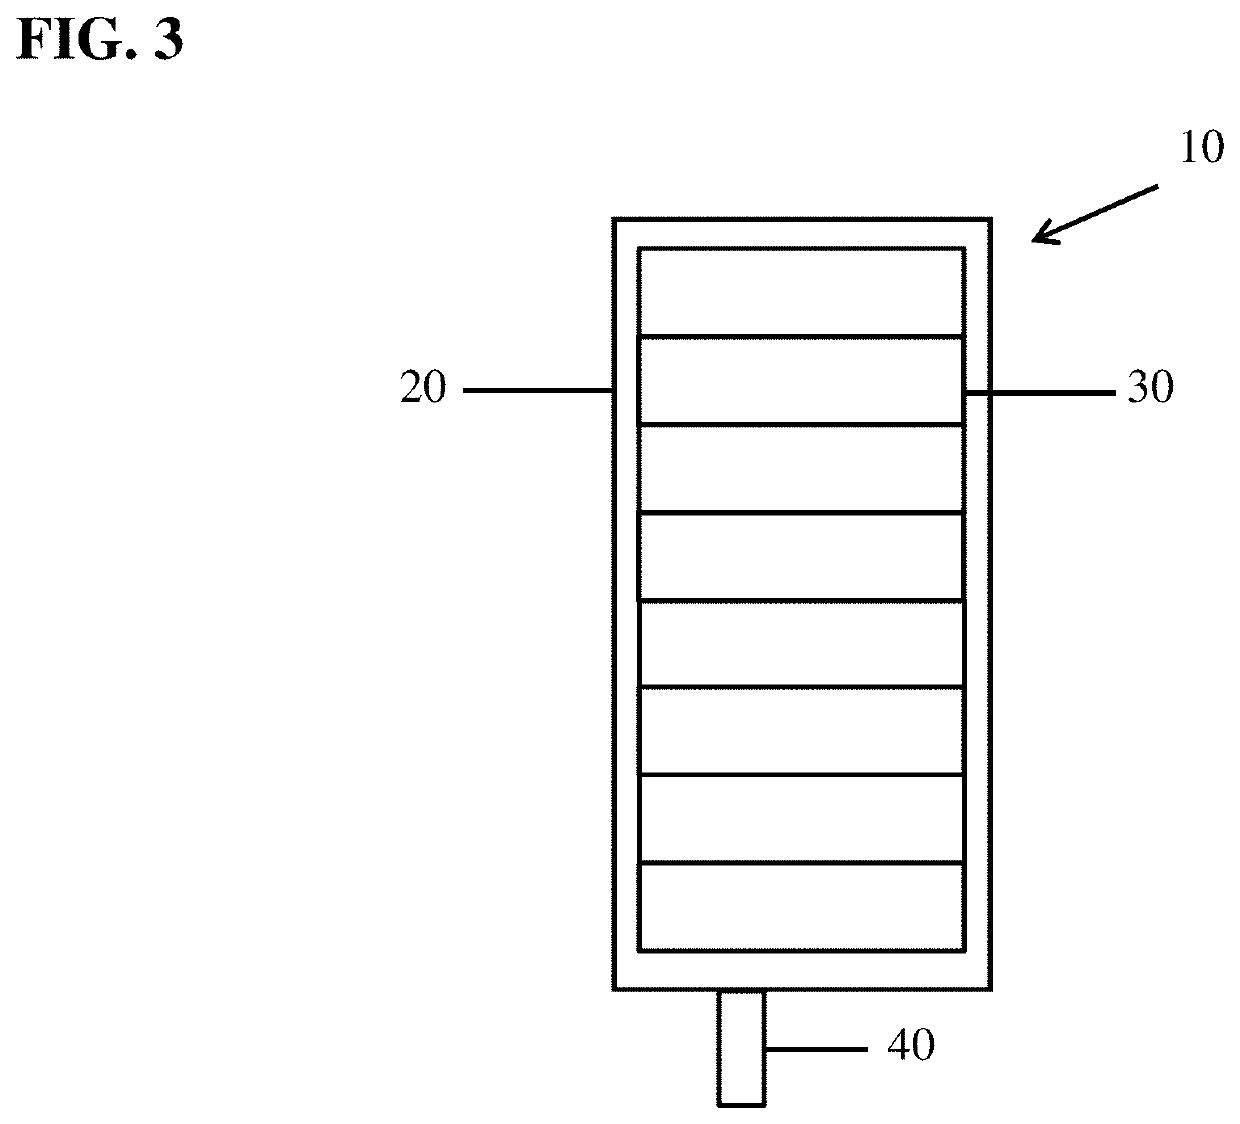 Method for enhancing volumetric capacity in gas storage and release systems